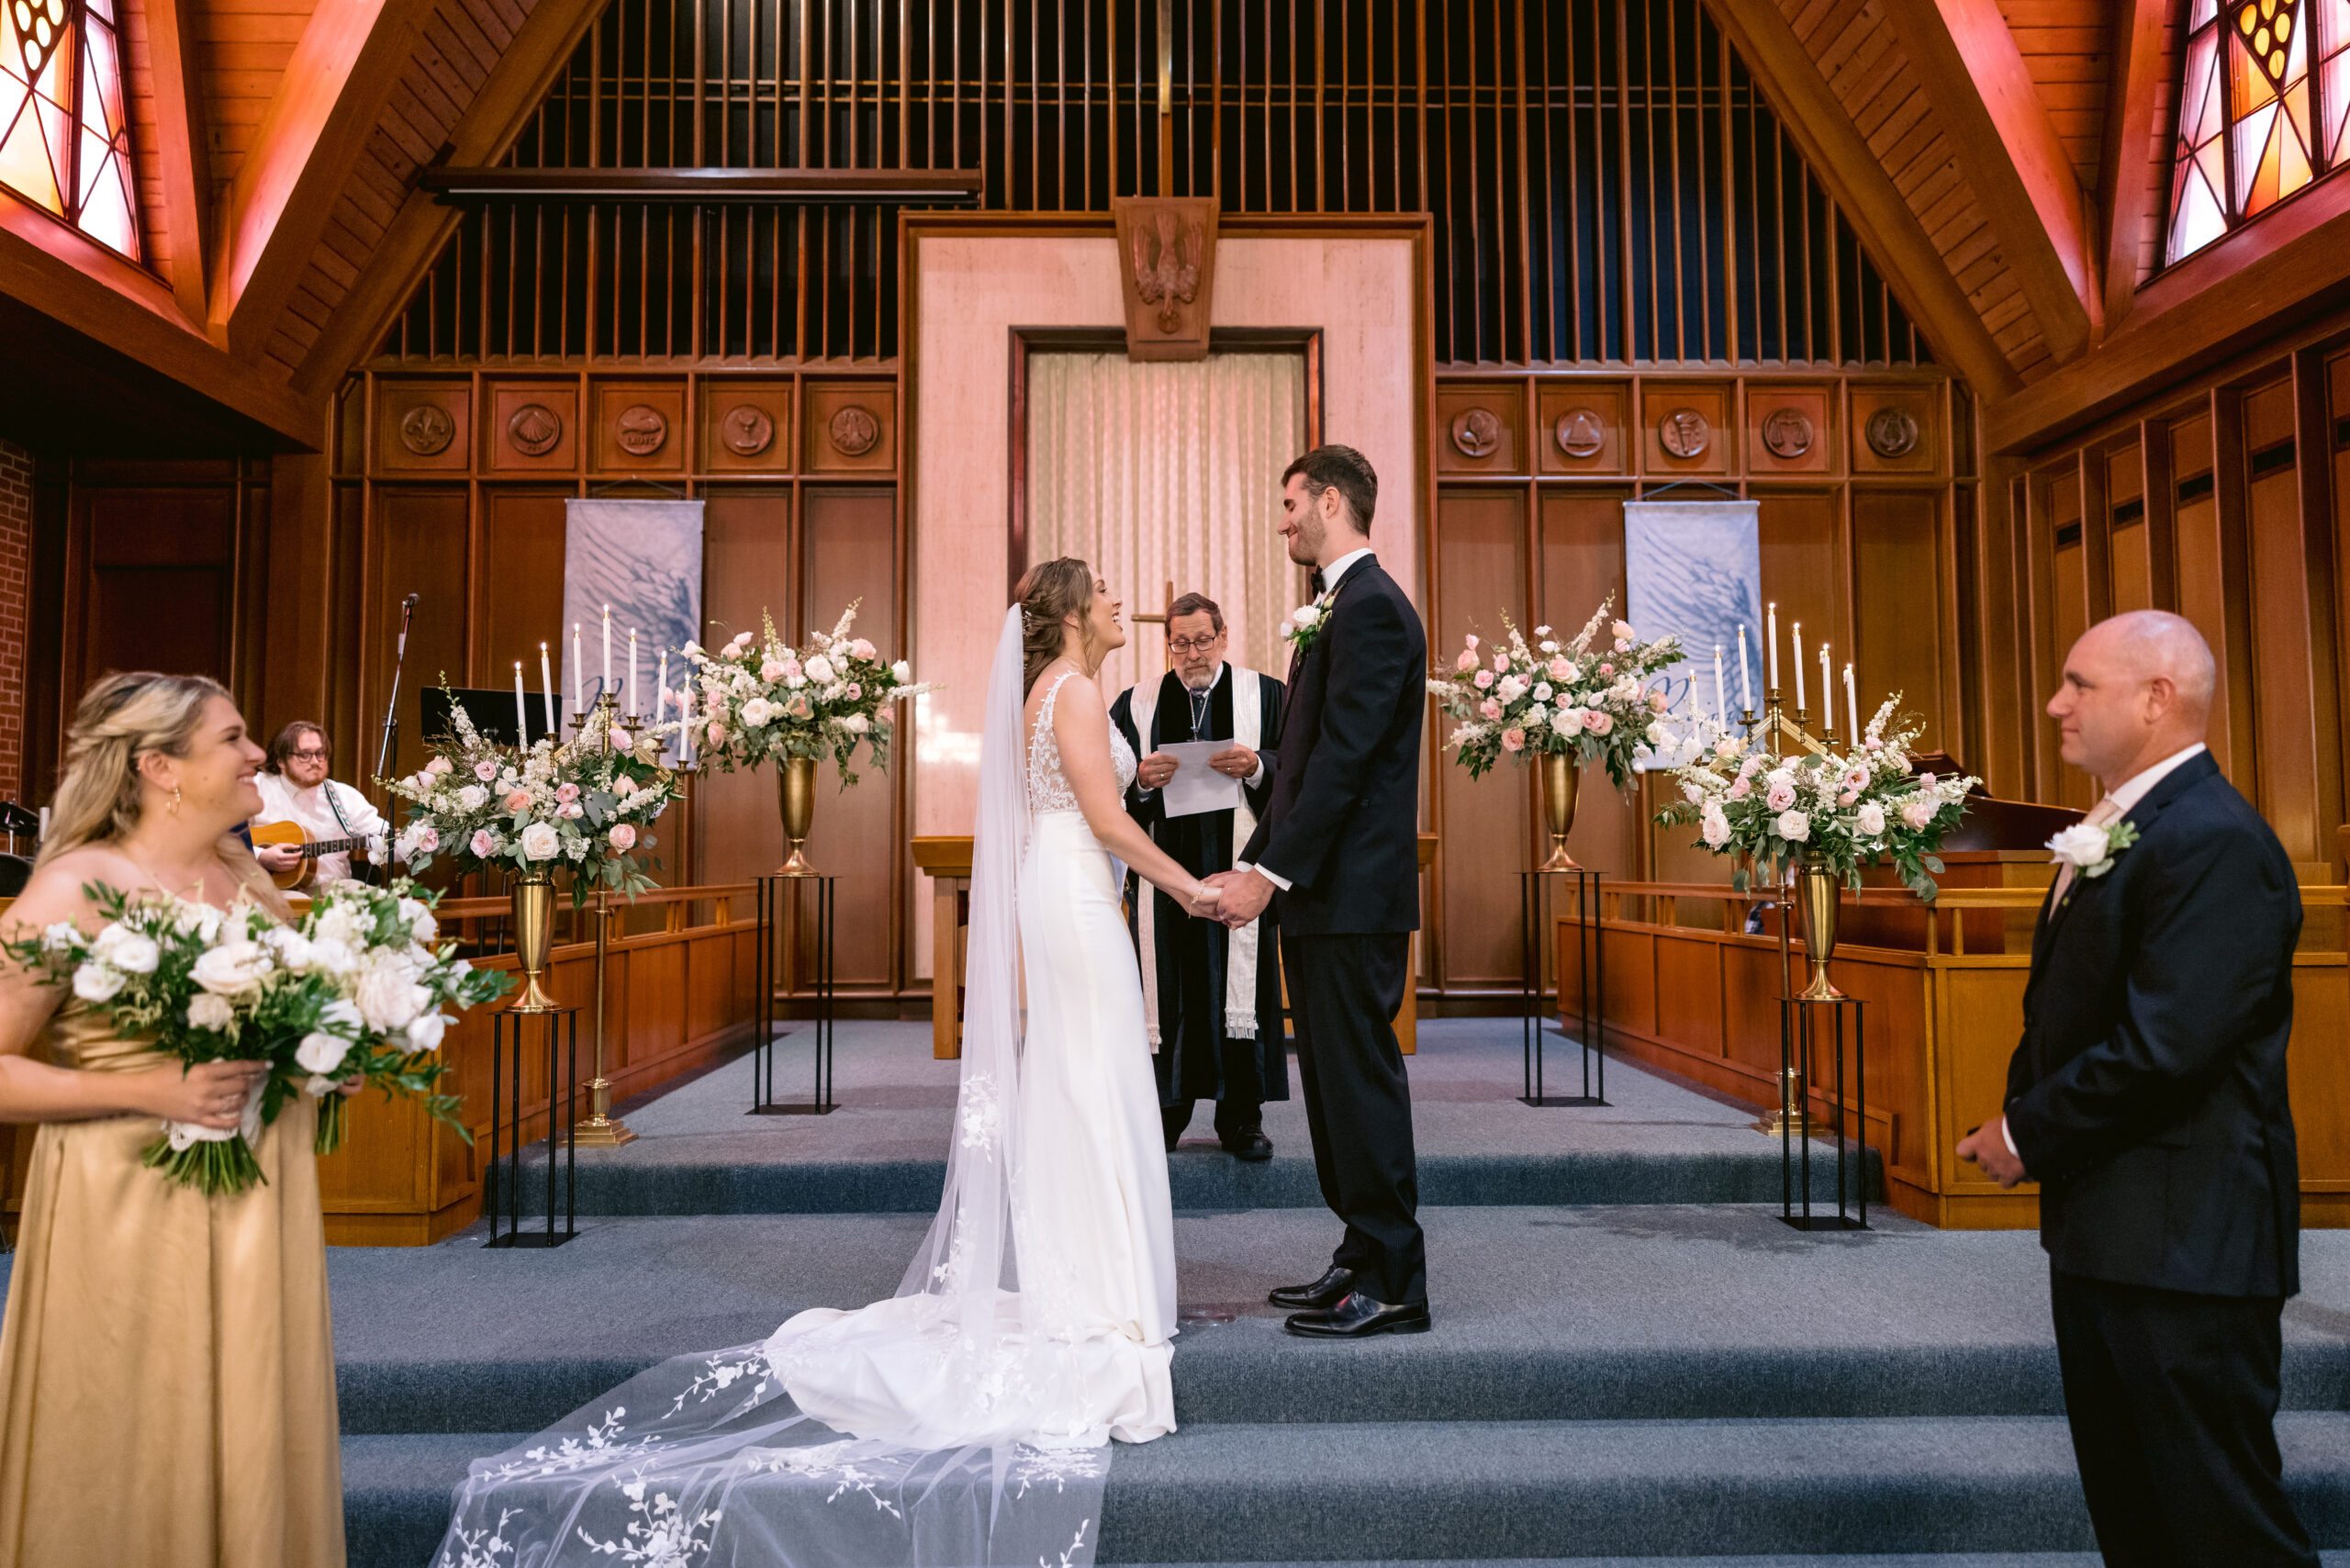 Bride and groom at the alter in the catholic church